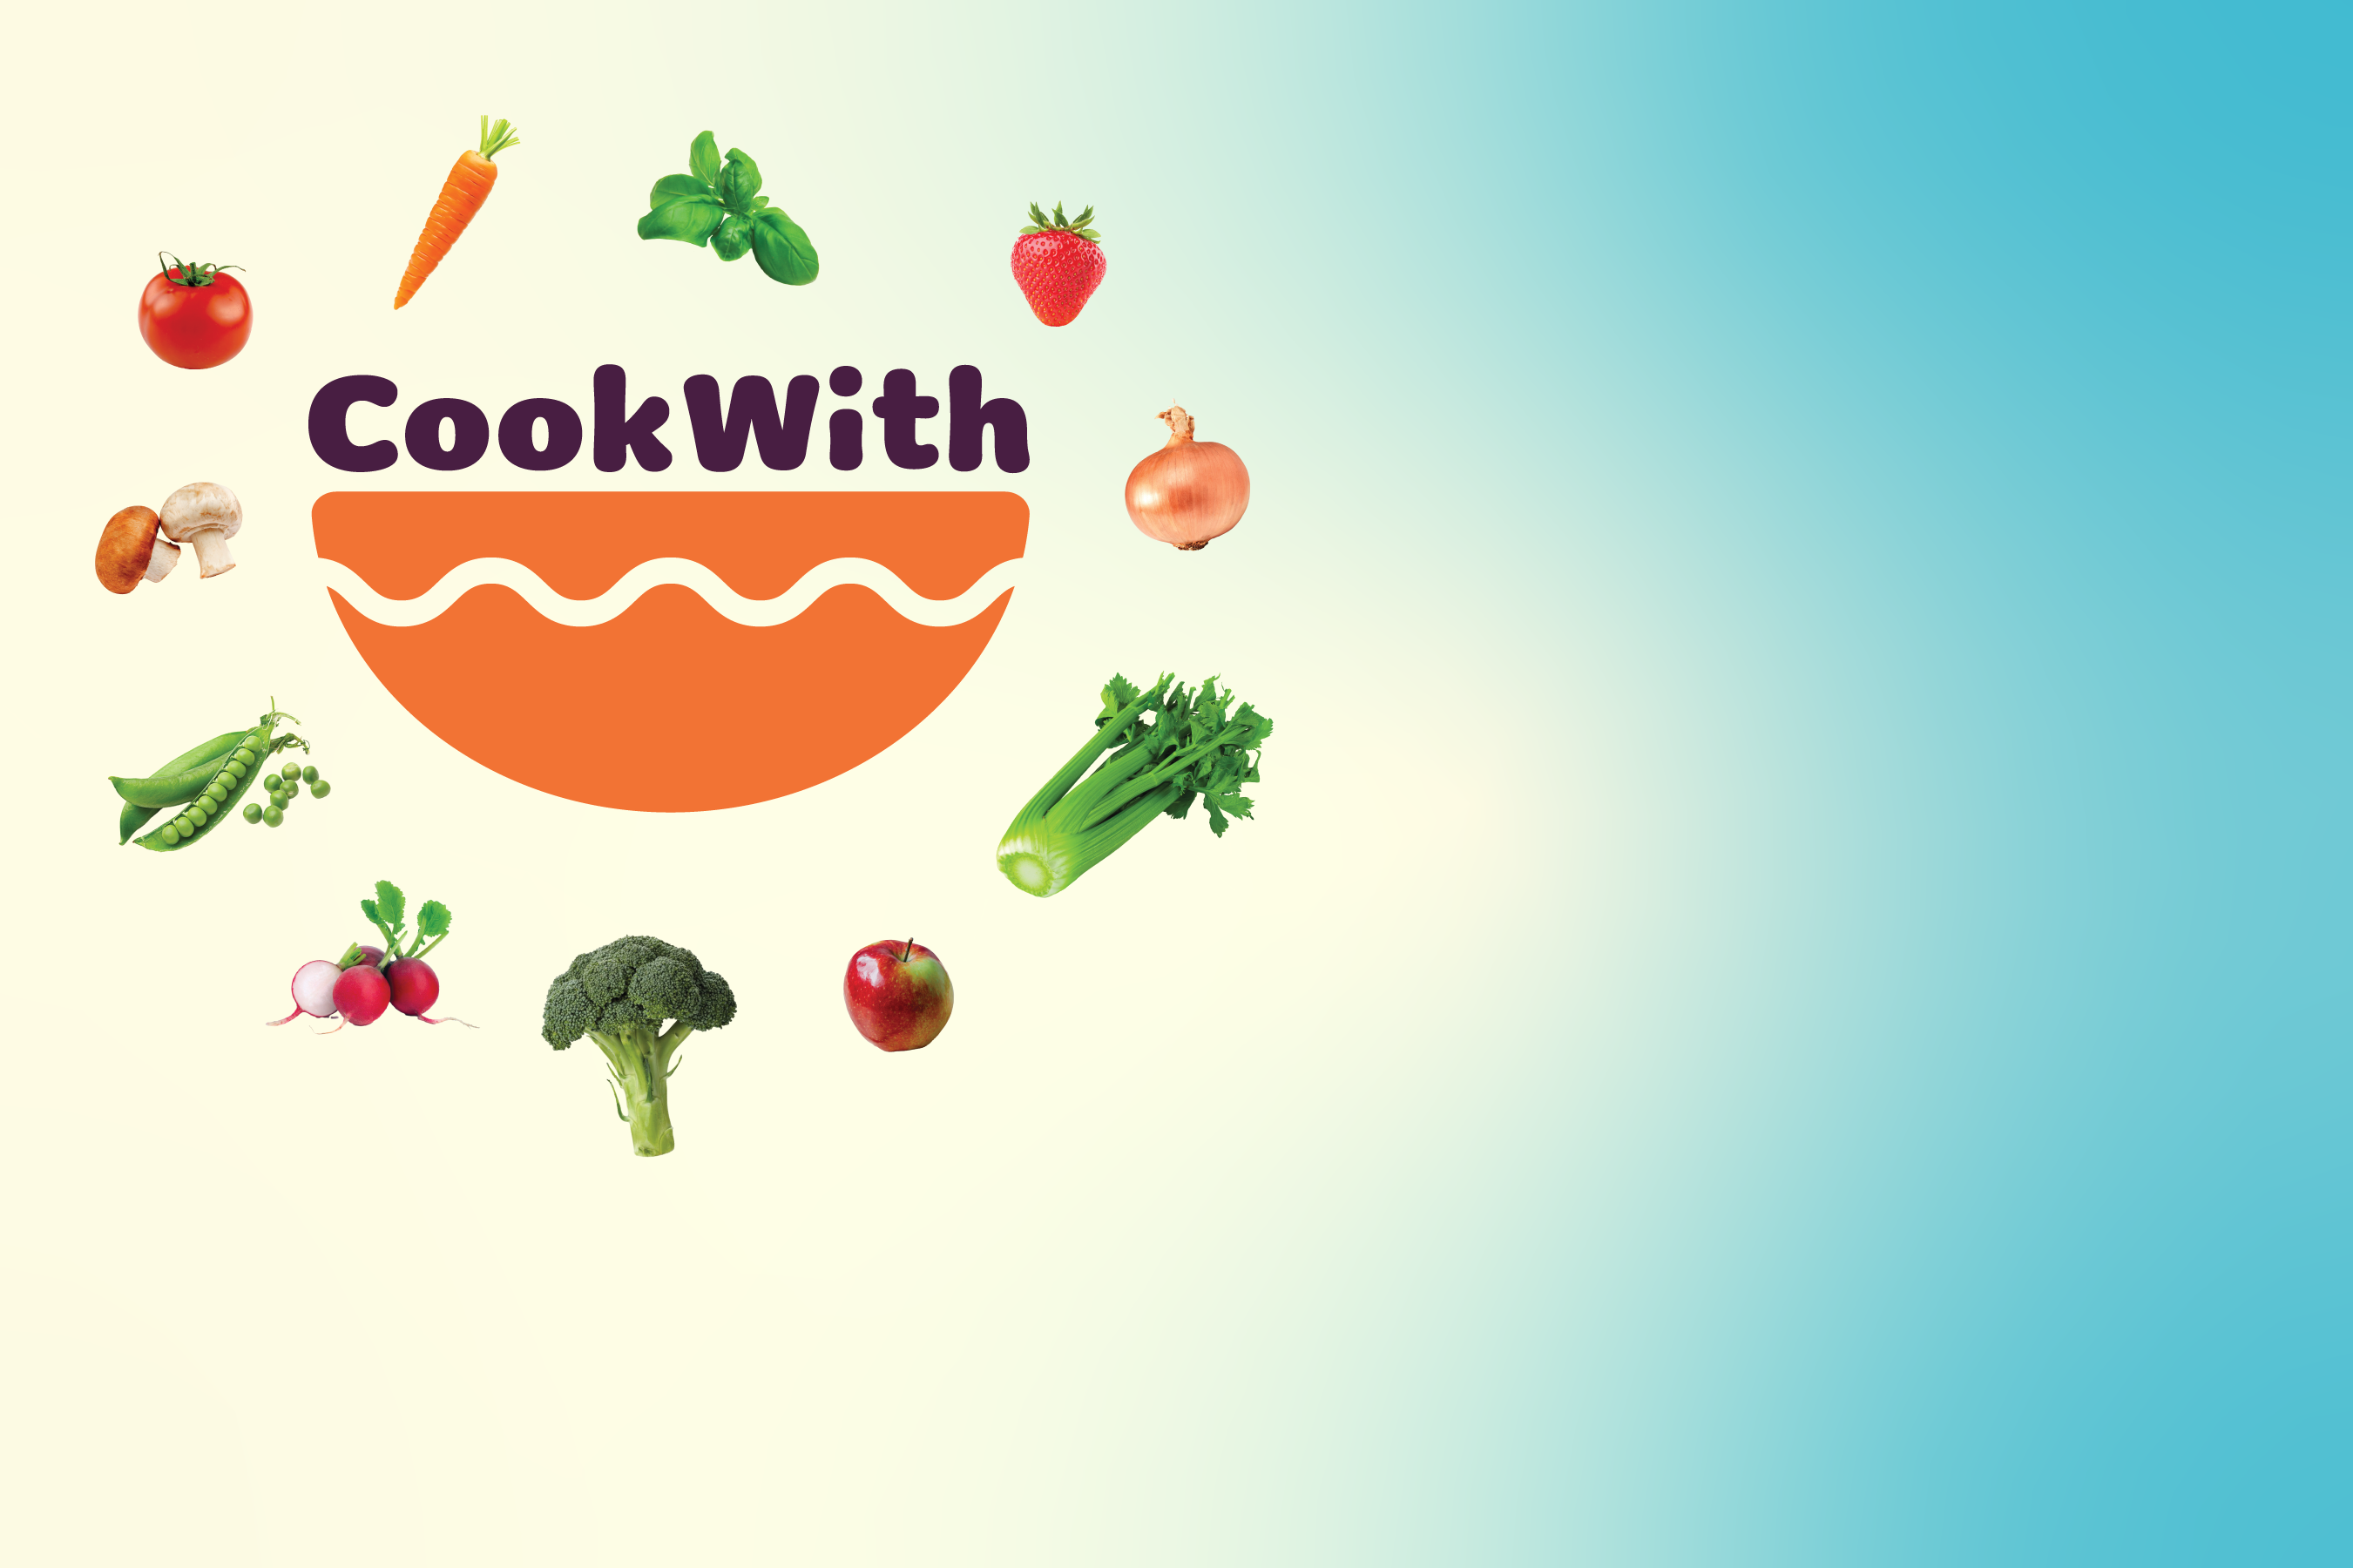 Welcome to the CookWith app. See what it looks like inside the app. A simple interface allows users to navigate easily. Find healthy foods and recipes. Read through helpful how-to's. Sort through categories you want.